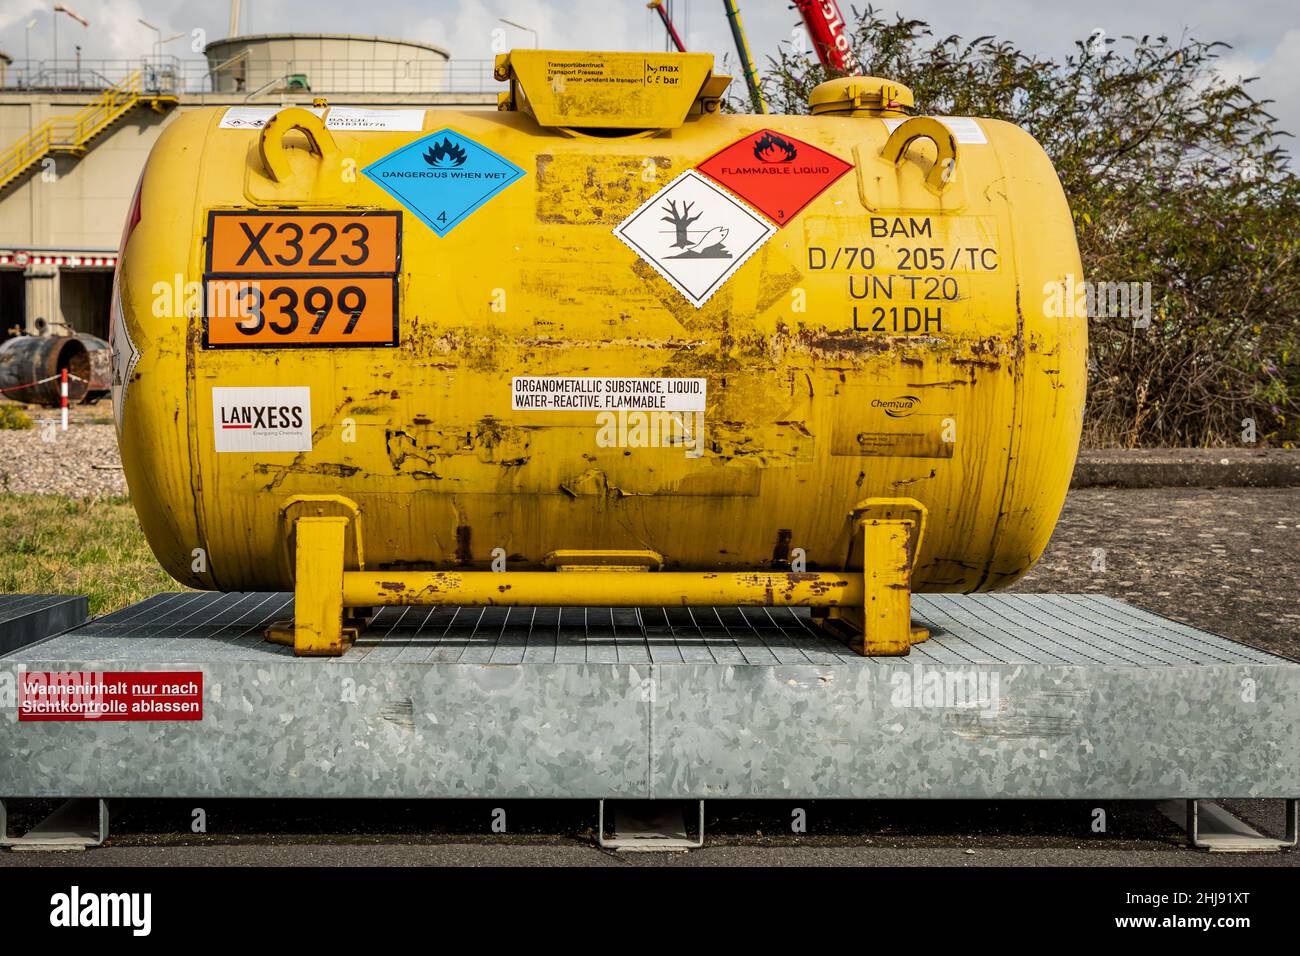 A hazmat container transport vessel for a liquid, water-reactive, flammable organometallic substance over a spill protection container, UN number 3399 Stock Photo